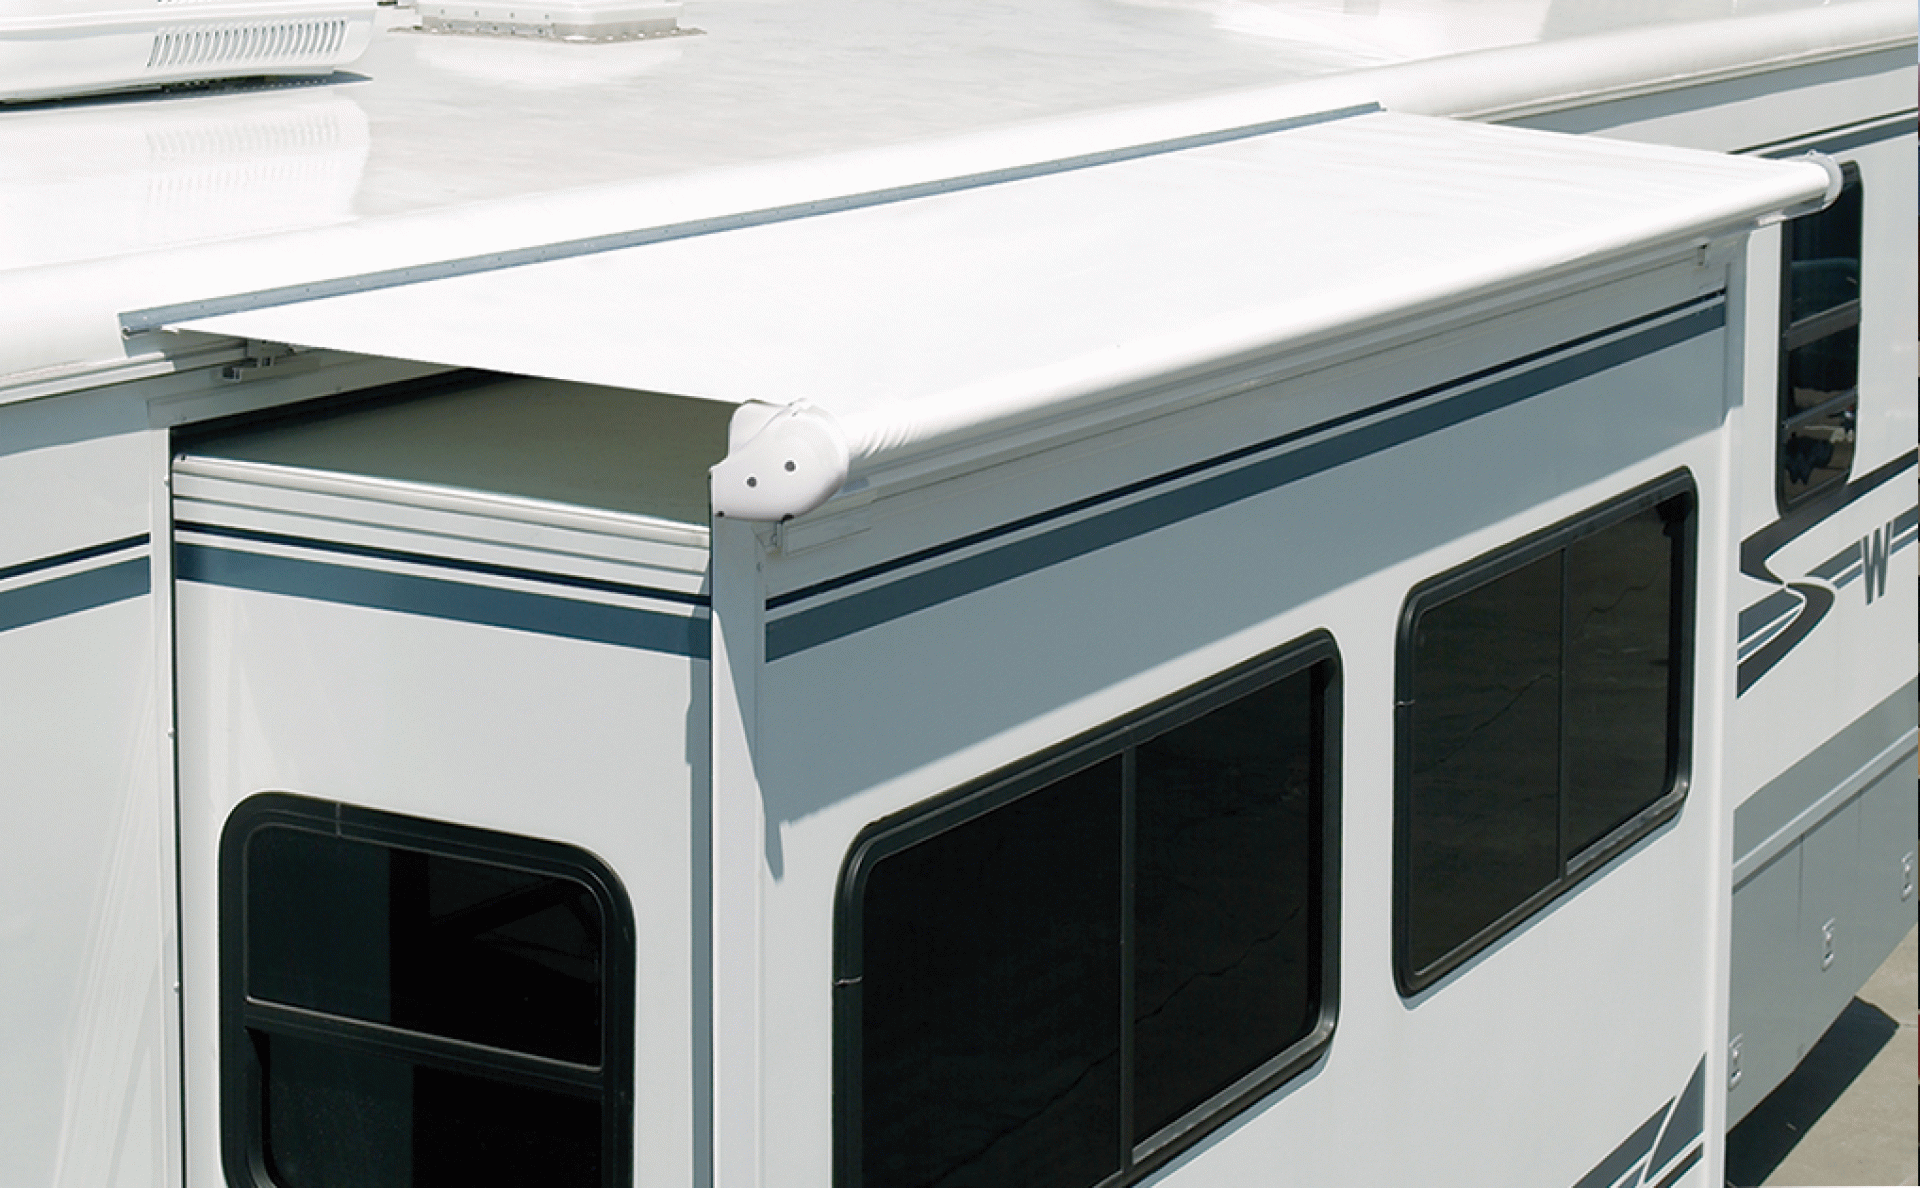 CAREFREE OF COLORADO | UQ1010025 | SIDEOUT KOVER III AWNING 94" - 101" ROOF RANGE WHITE VINYL FABRIC & DEFLECTOR